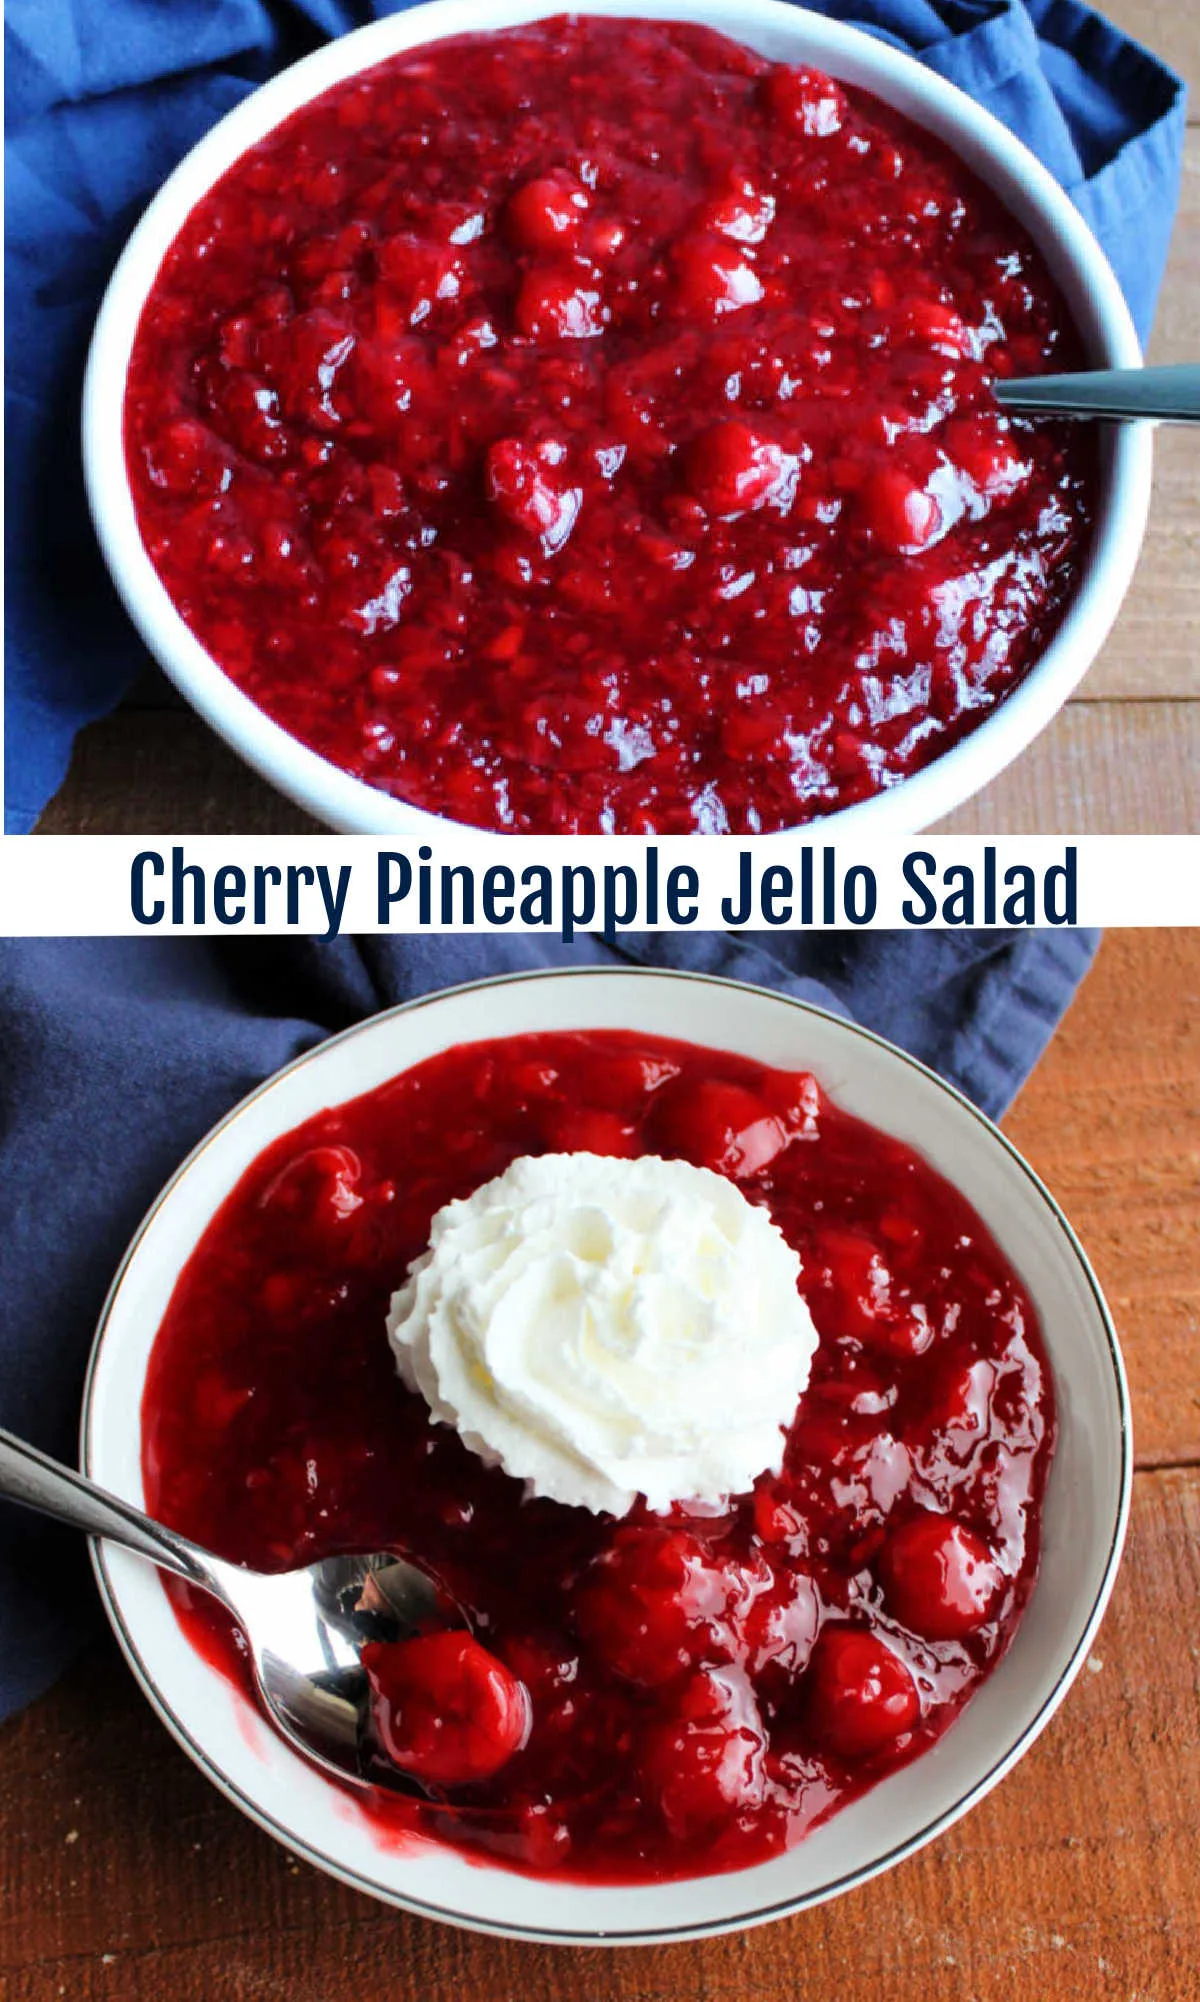 This fun cherry pineapple Jello salad is sure to be a hit with your family. It is a simple make ahead side dish or simple dessert that is festive for a holiday or fun for a BBQ.  